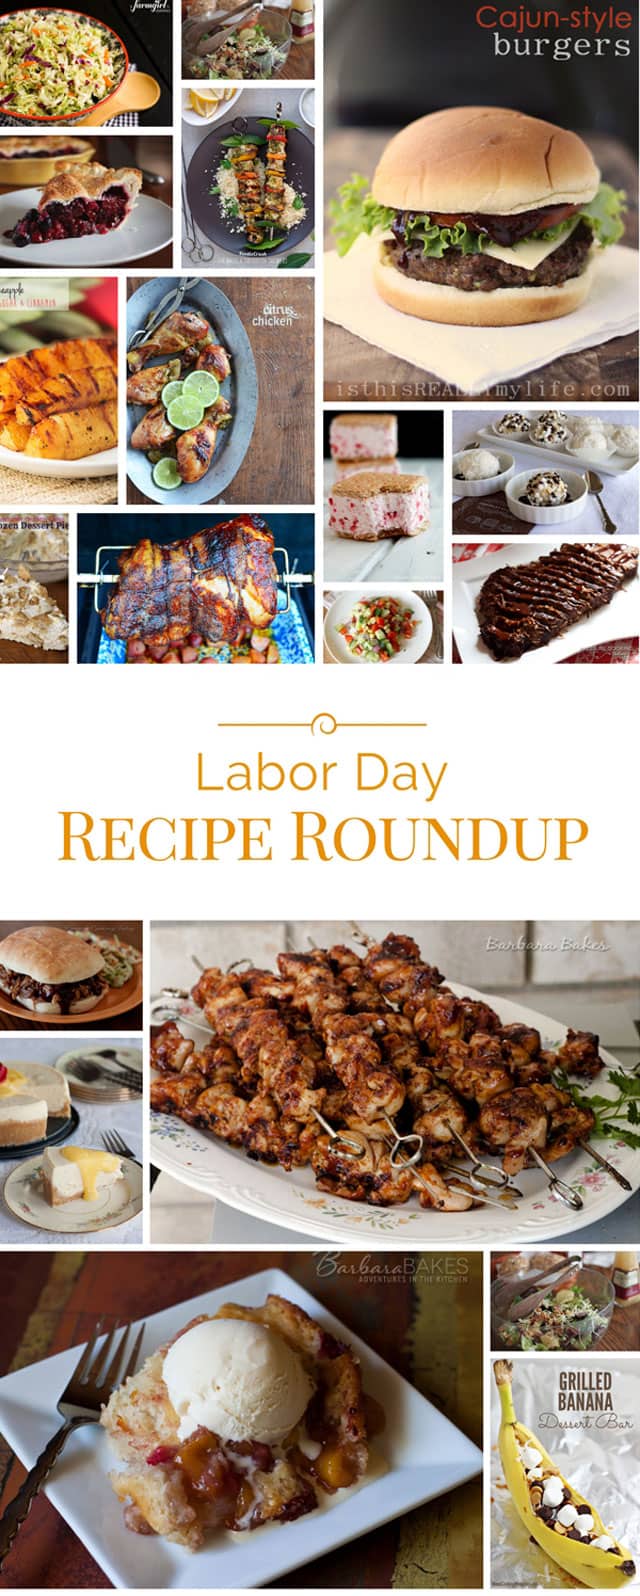 Collage of 50+ Mouth-watering Labor Day Recipes perfect for a Labor Day barbecue or picnic.